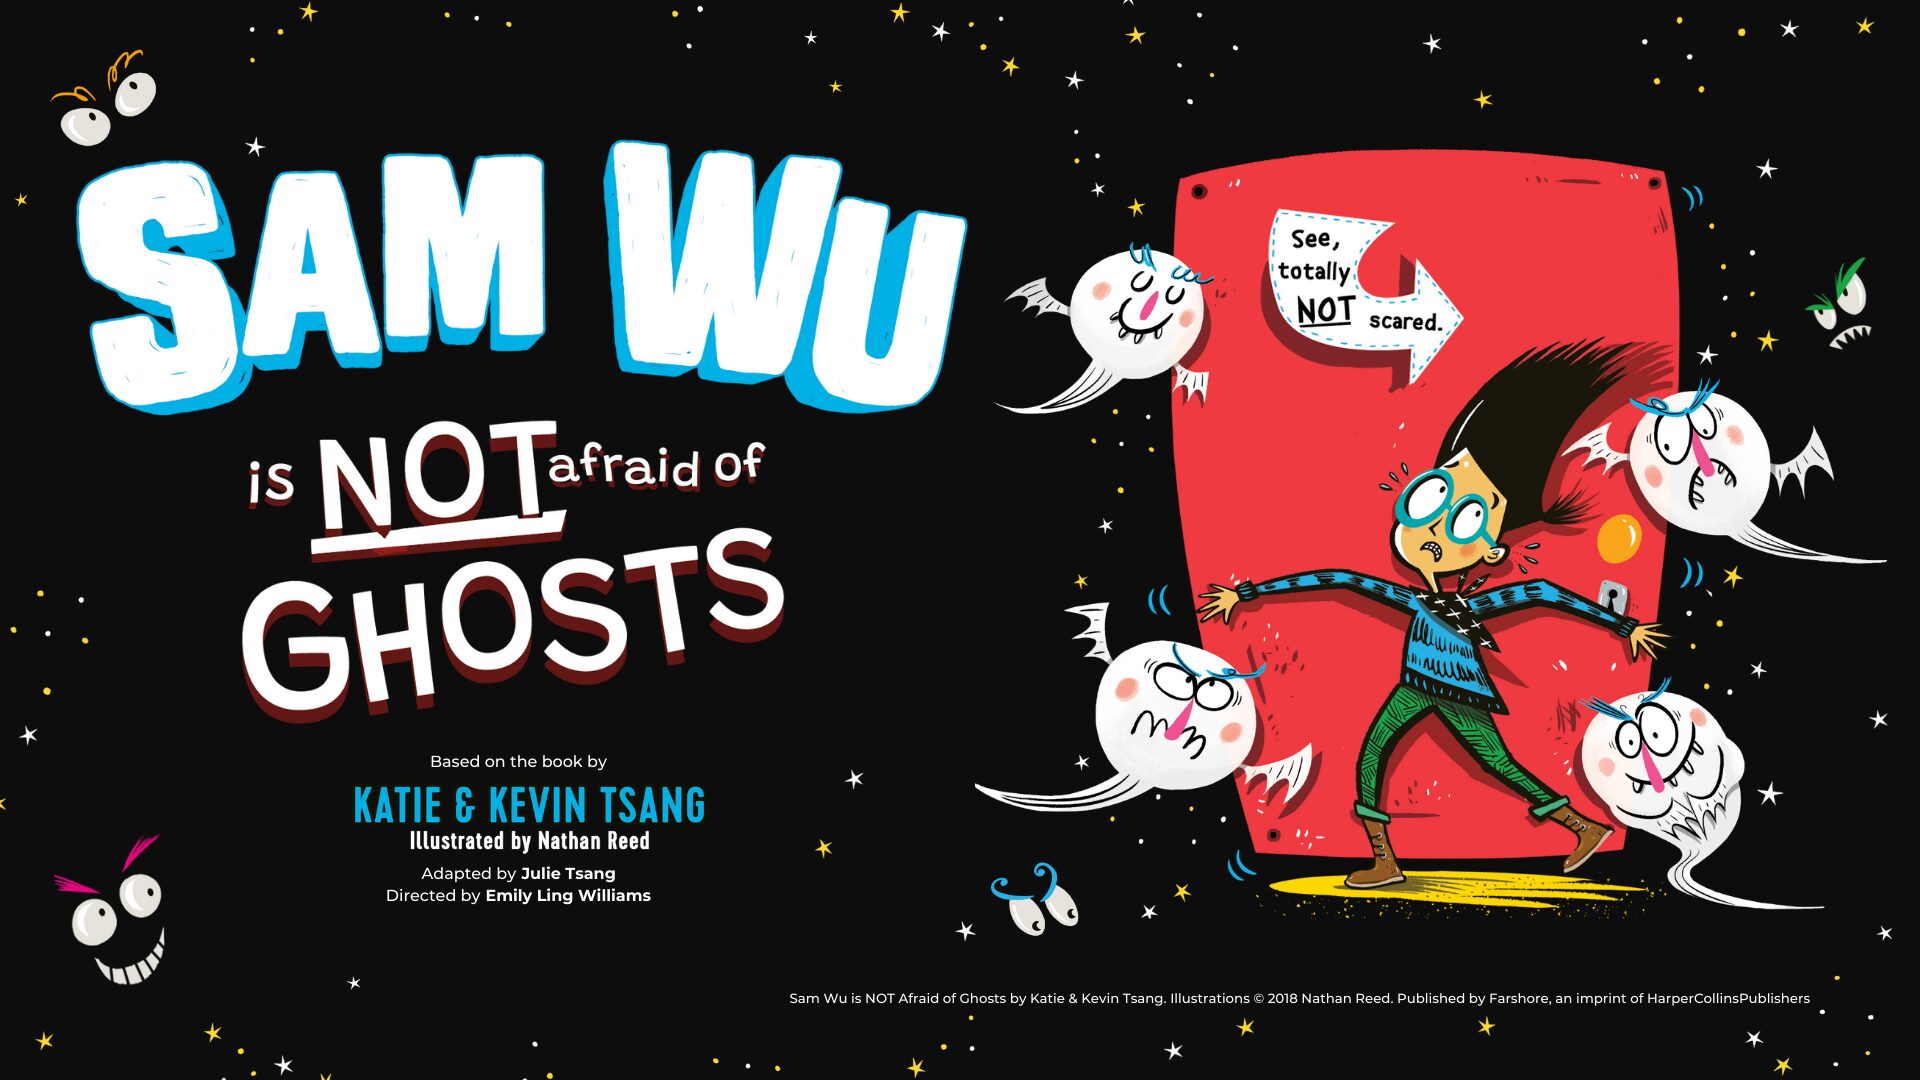 Sam Wu is NOT Afraid of Ghosts at Polka Theatre